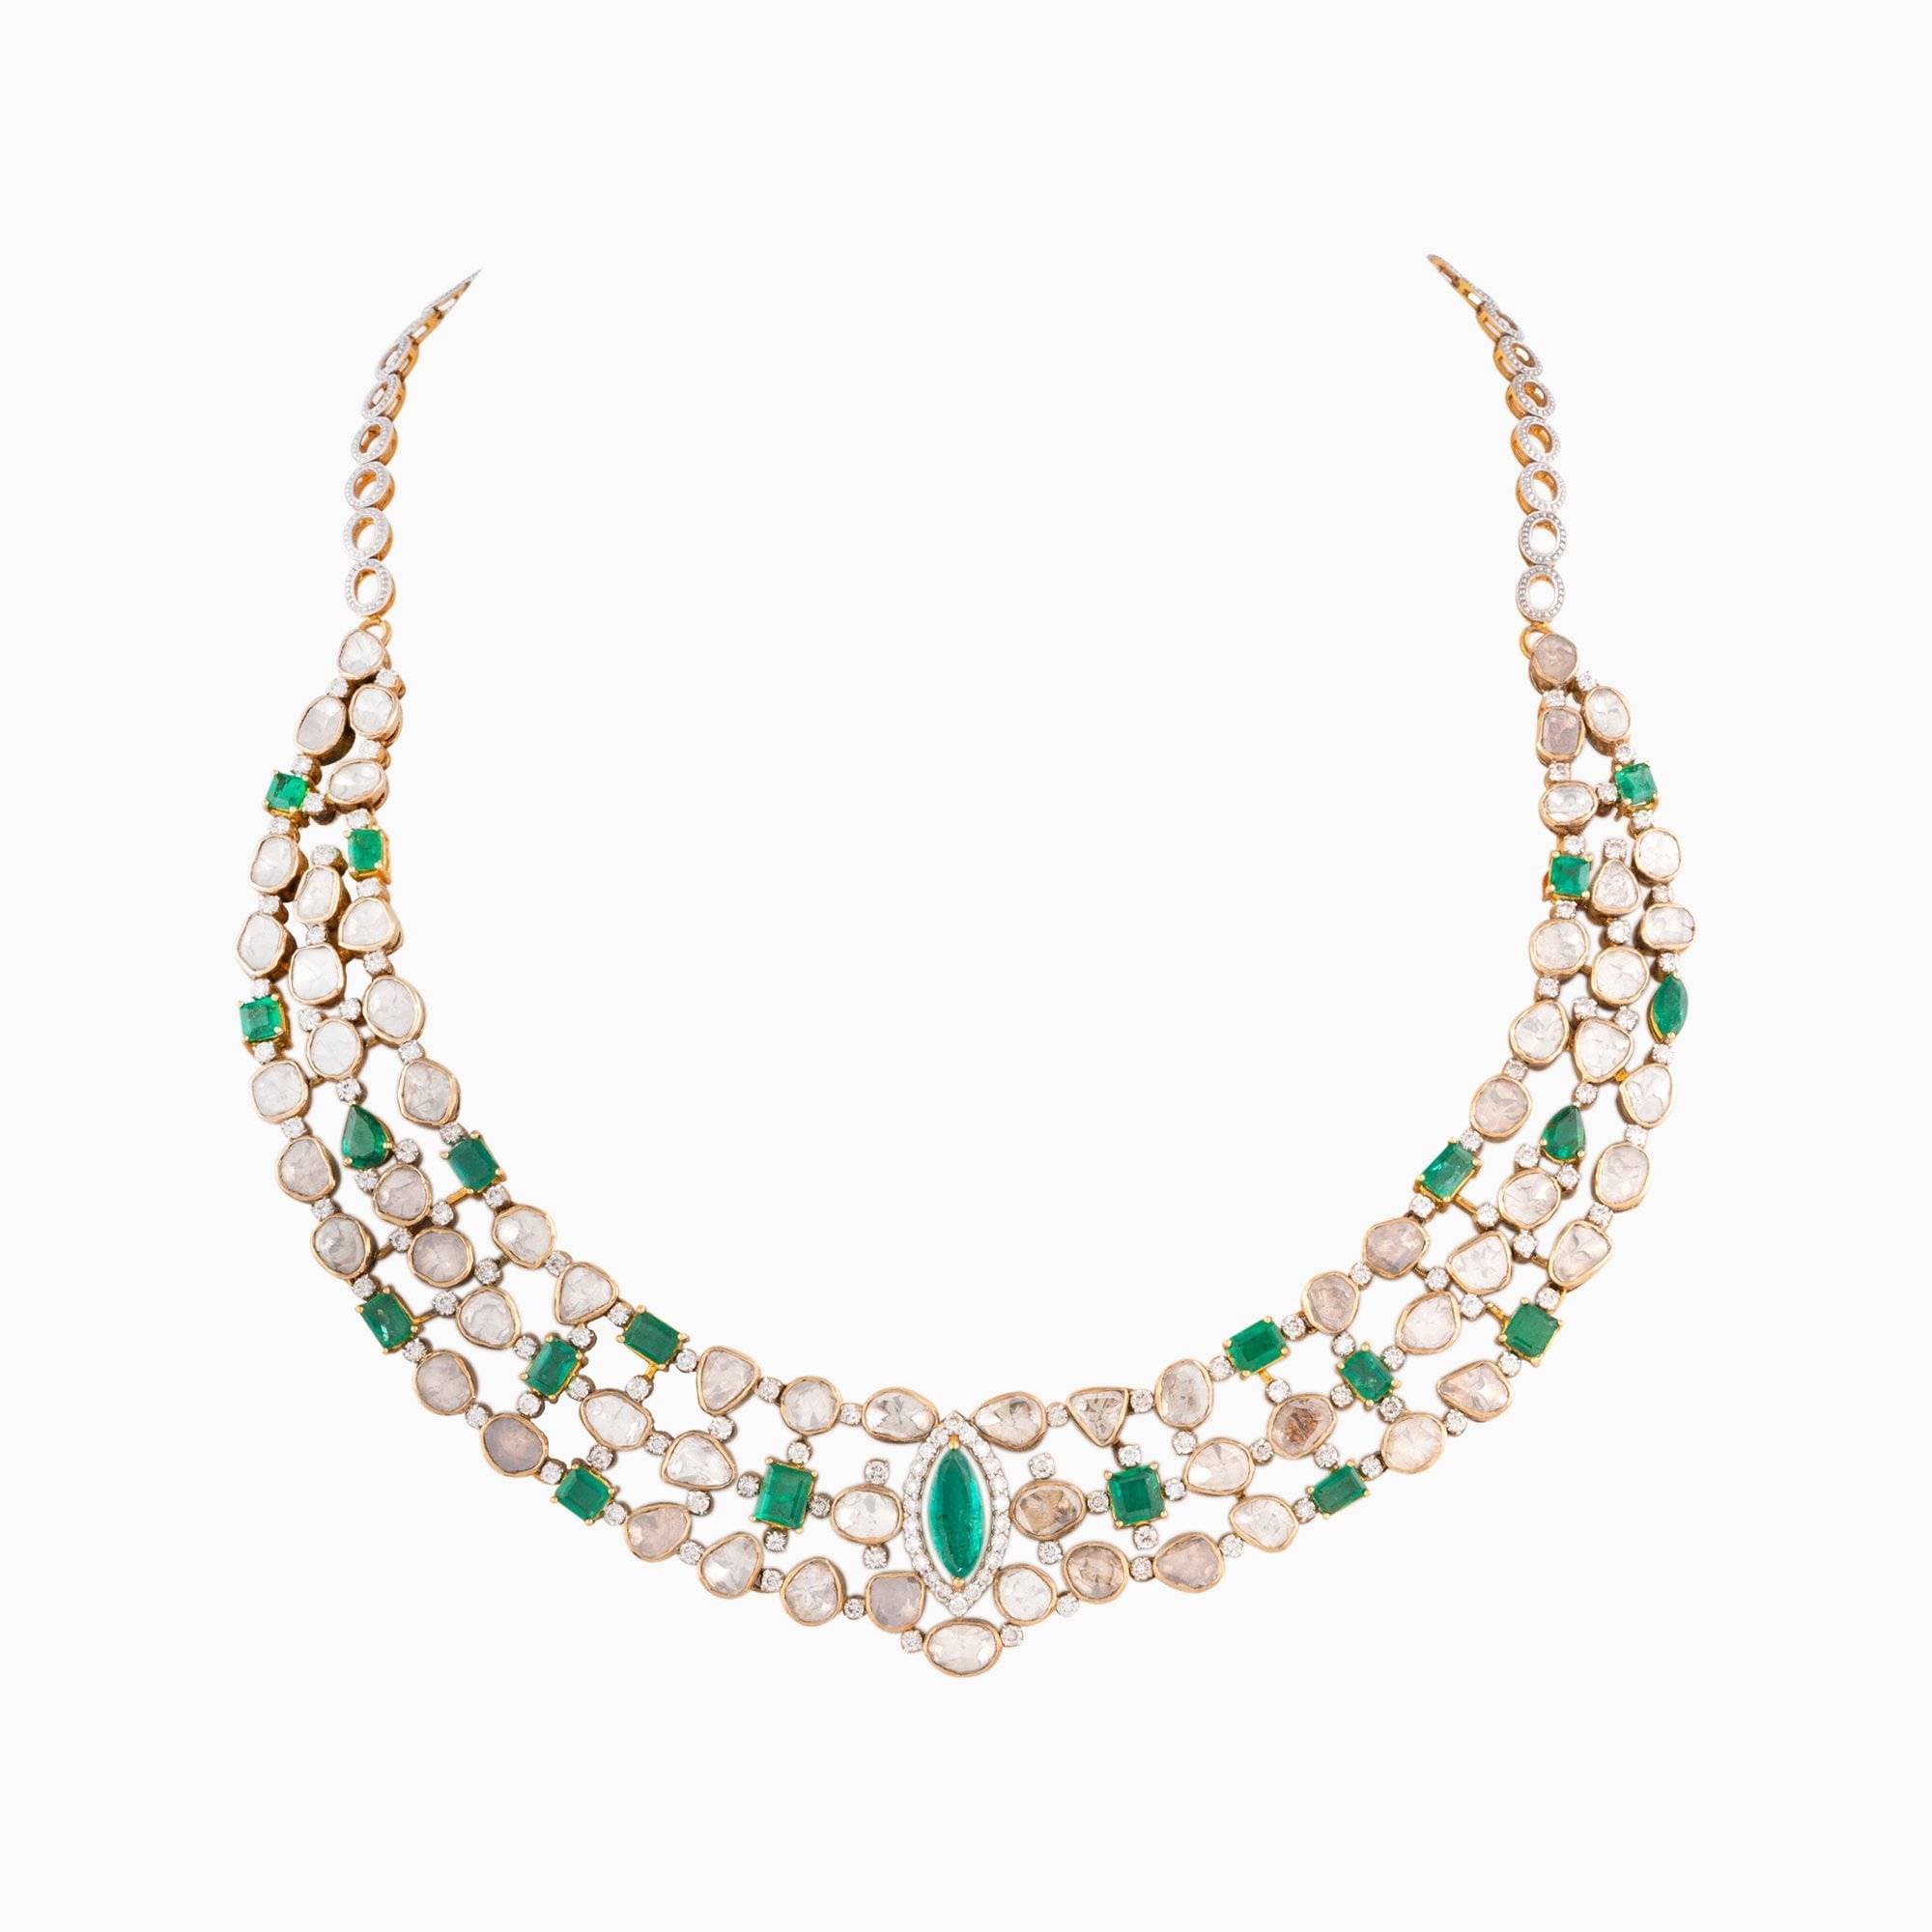 Necklace with Open Setting, Uncut Diamond, Round Cut Diamond, Emerald (Marquise Cut and Octagon Cut) in Gold Chain - WDN684